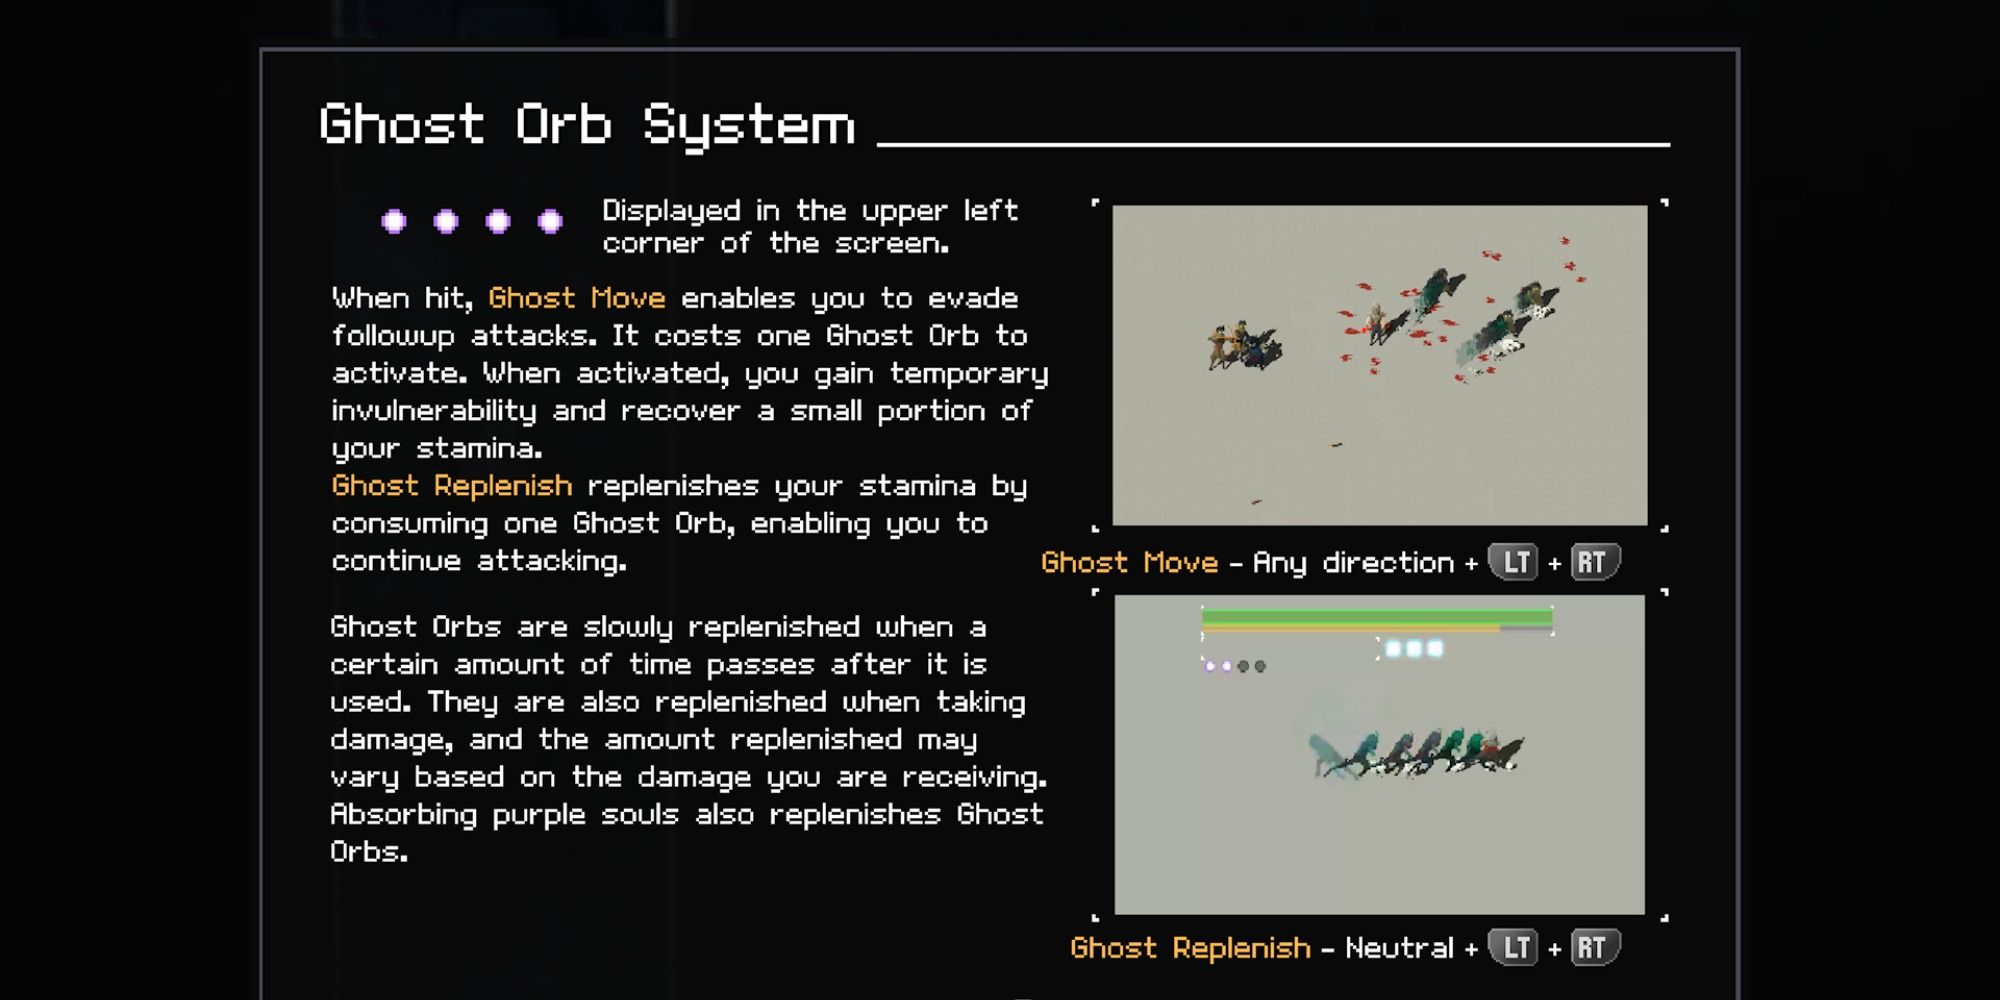 ghost orb system info panel in unsouled